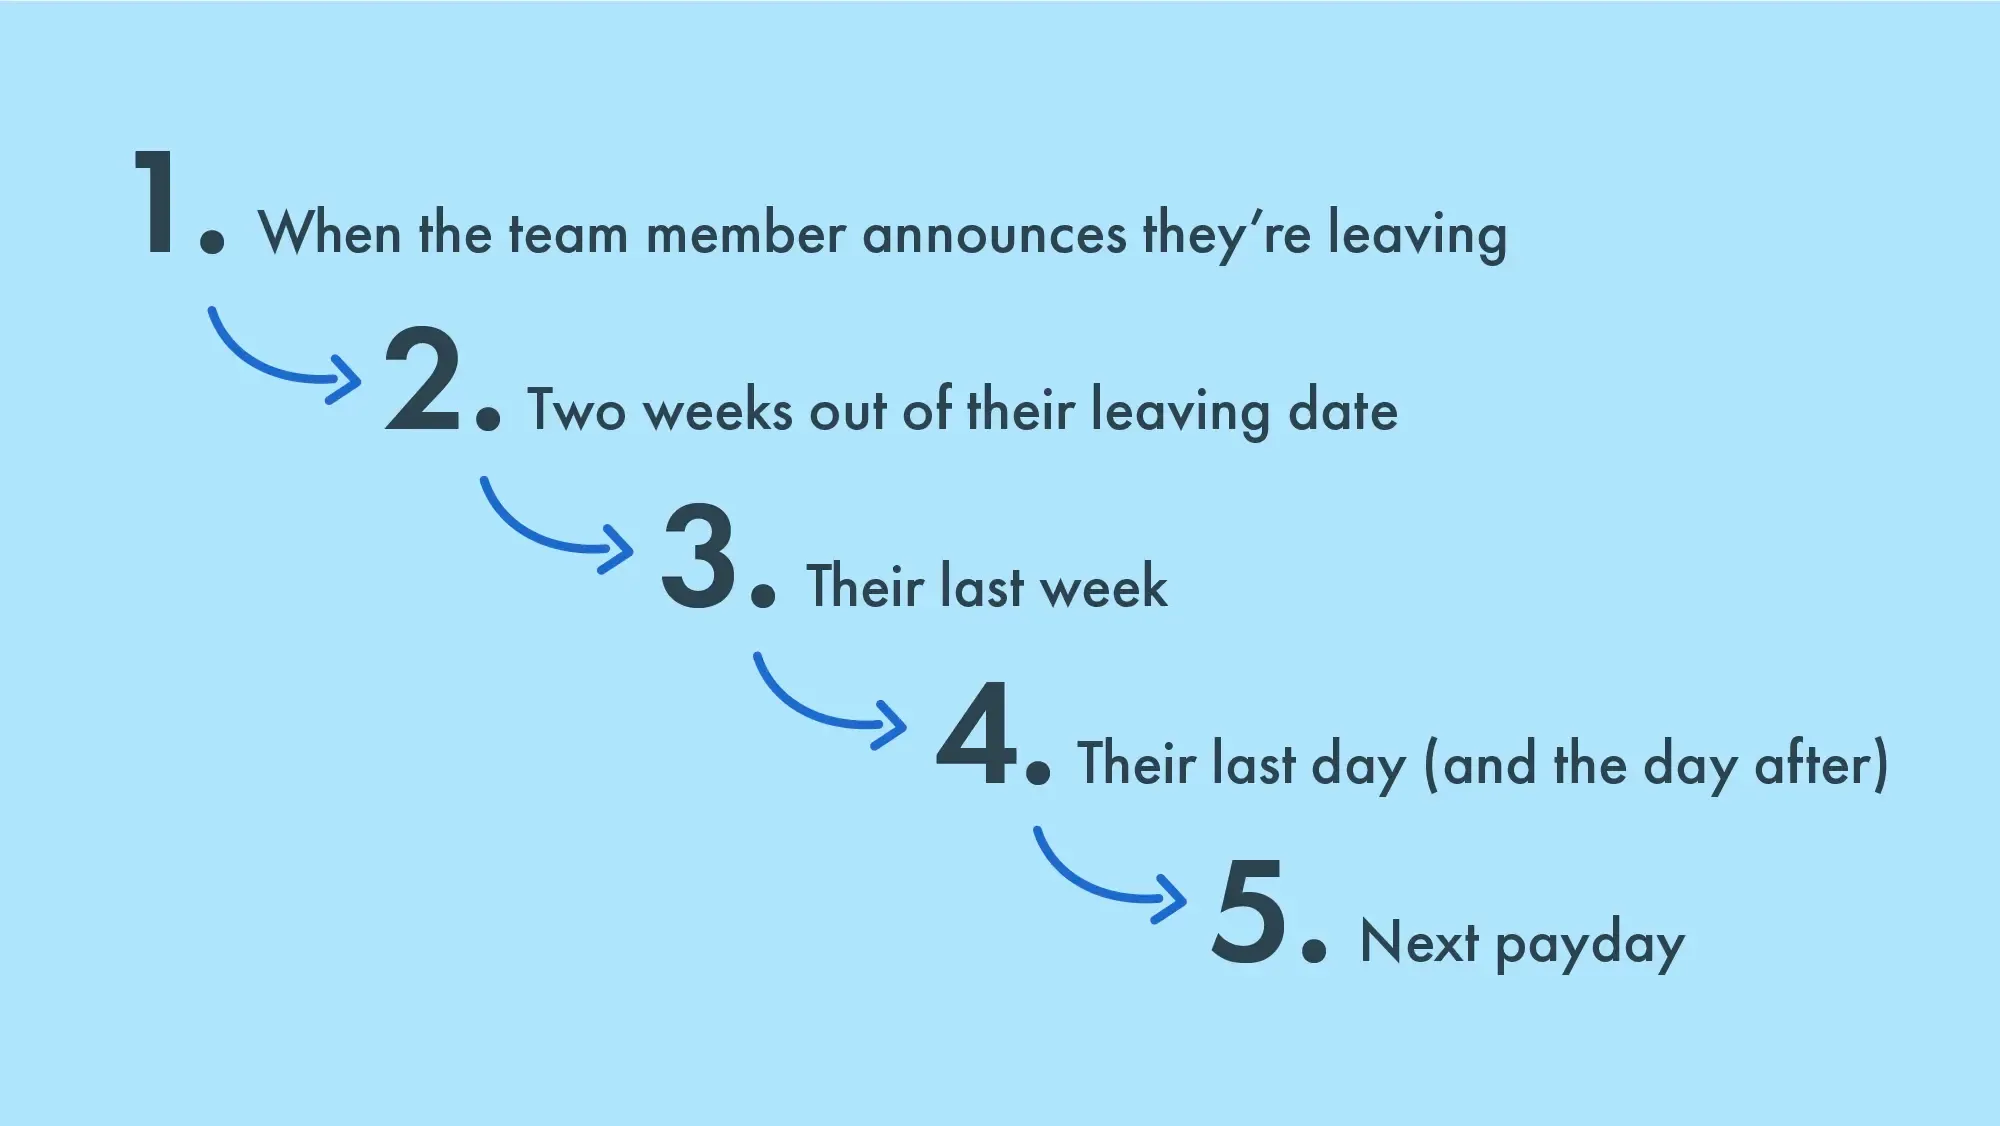 Visualisation of the 5 steps to offboard an employee